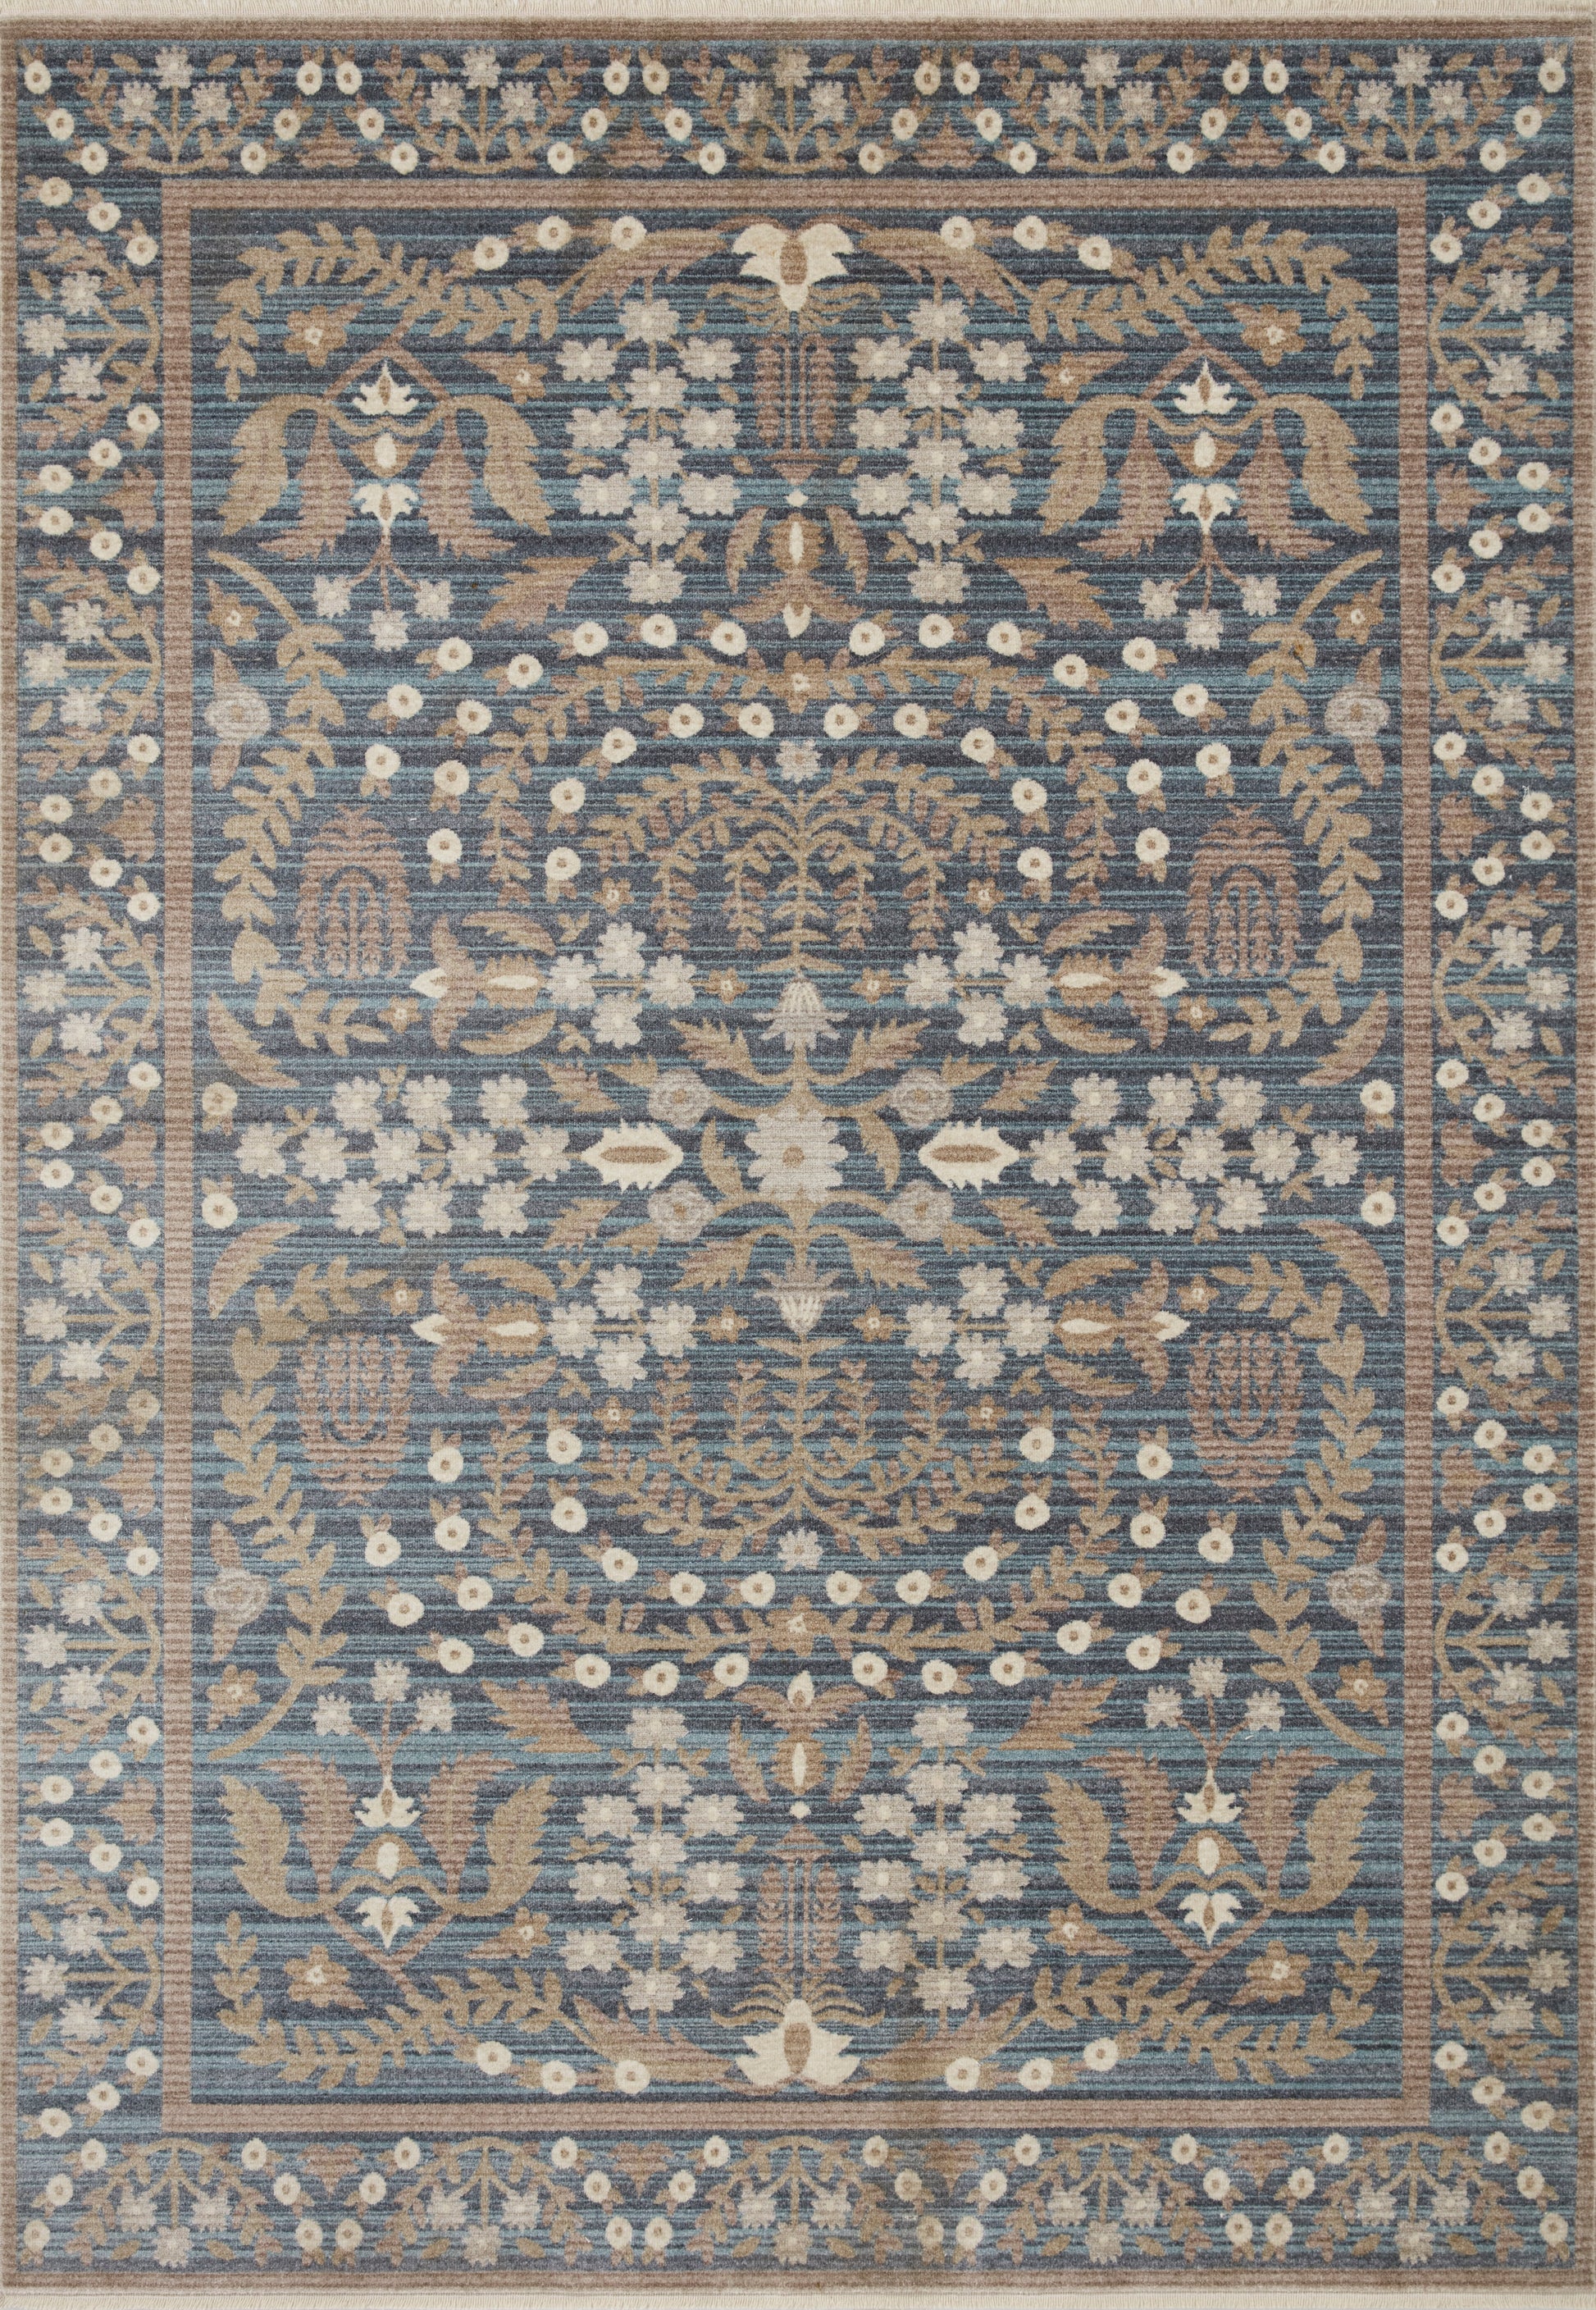 A picture of Loloi's Holland rug, in style HLD-04, color Navy